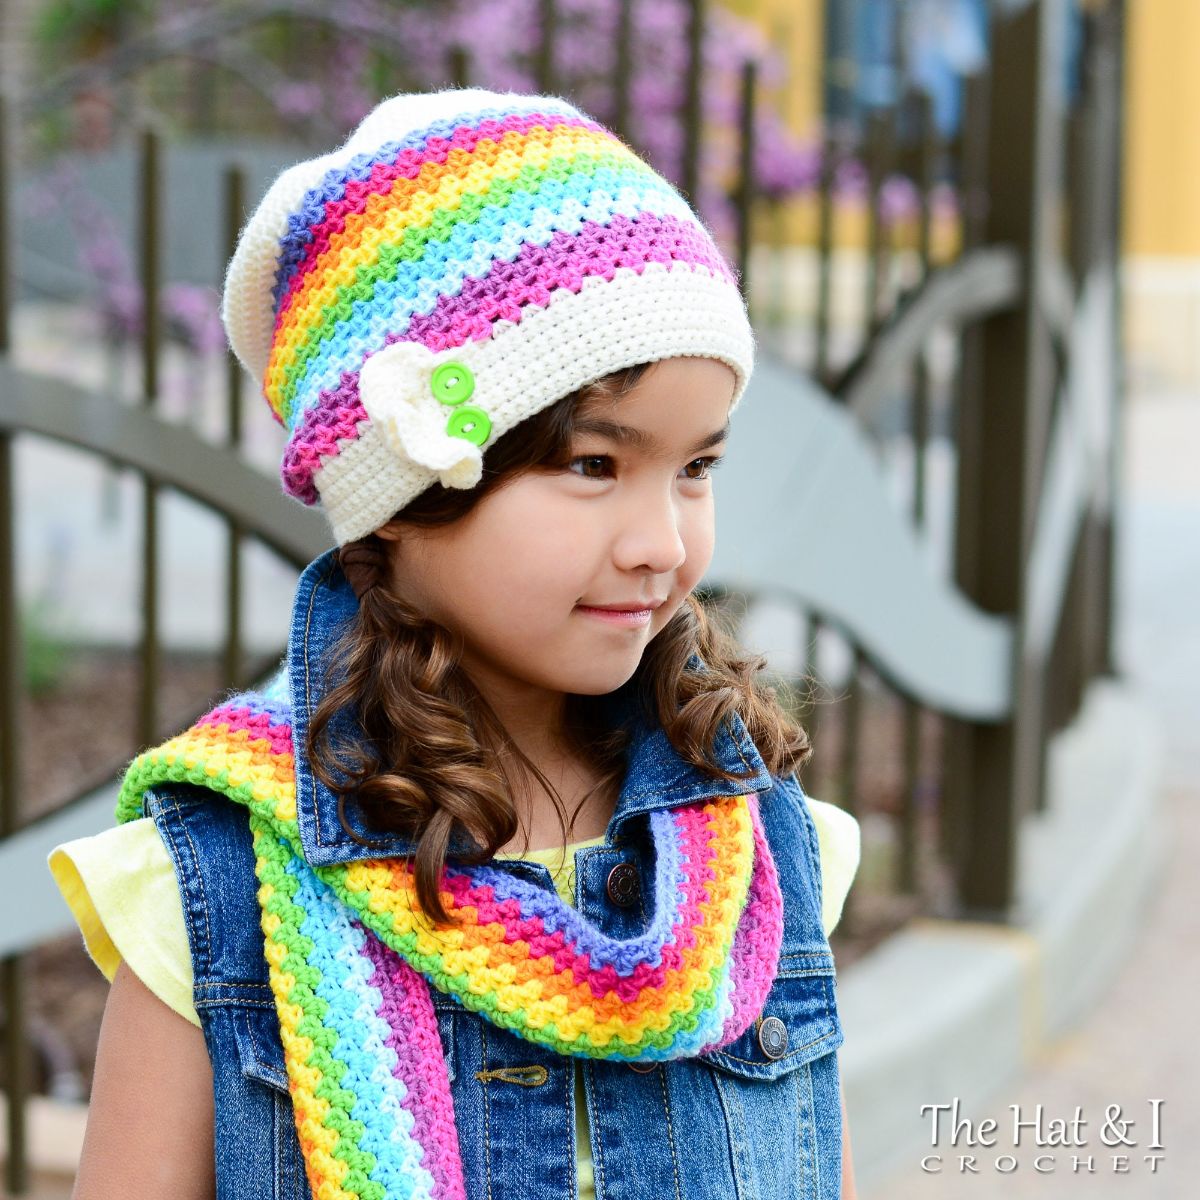 Brunette girl side facing wearing rainbow colored horizontally striped crochet beanie hat and matching scarf.